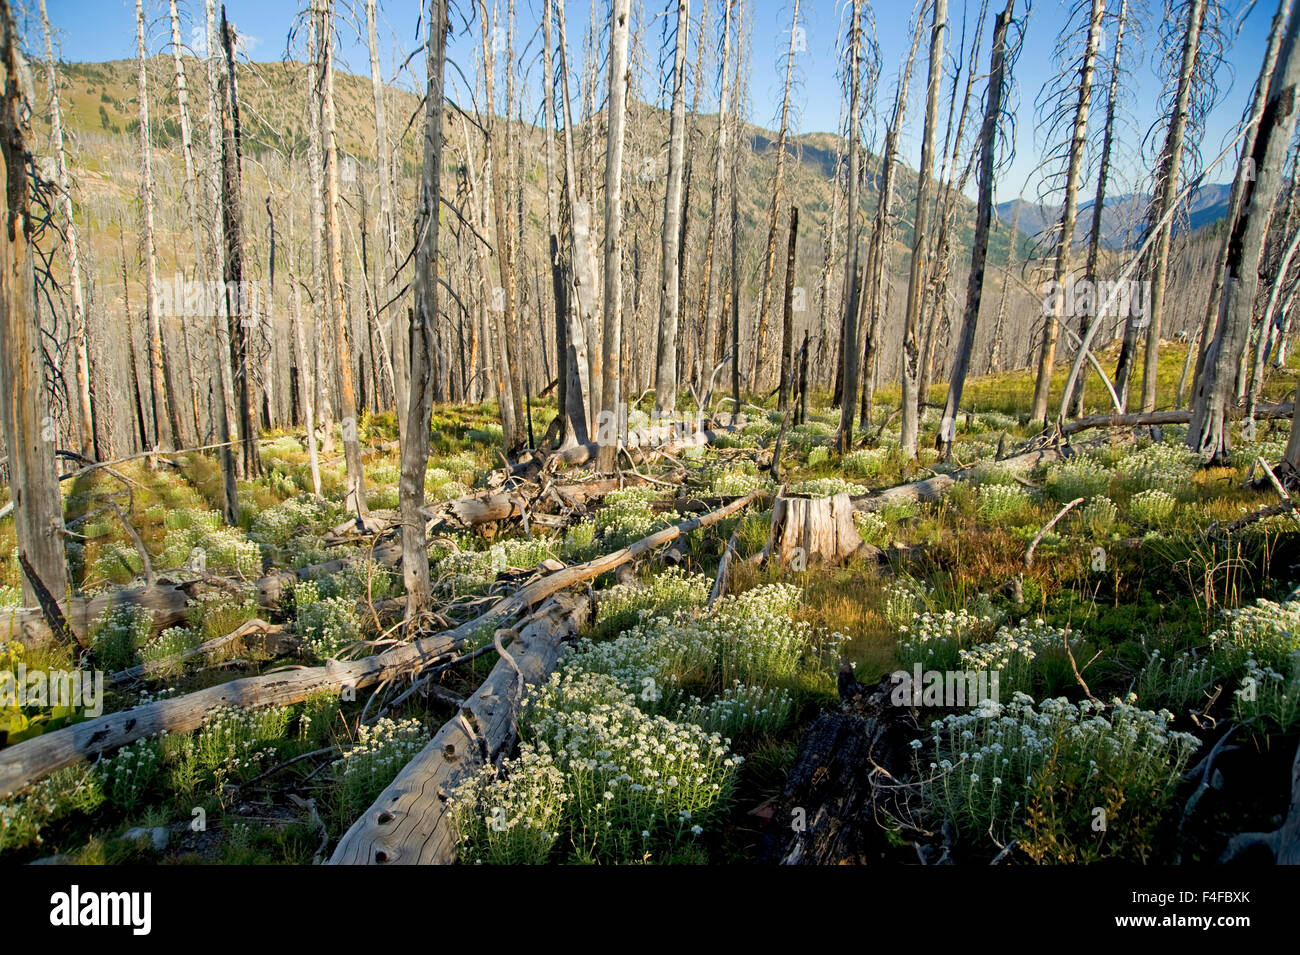 Washington, Pasayten Wilderness, Okanogan-Wenatchee National Forest, North Cascades National Park, Hart's Pass. Landscape of pearly everlasting (Anaphalis margaritacea) wildflowers blooming amid dead trees burned out from a previous fire. Stock Photo